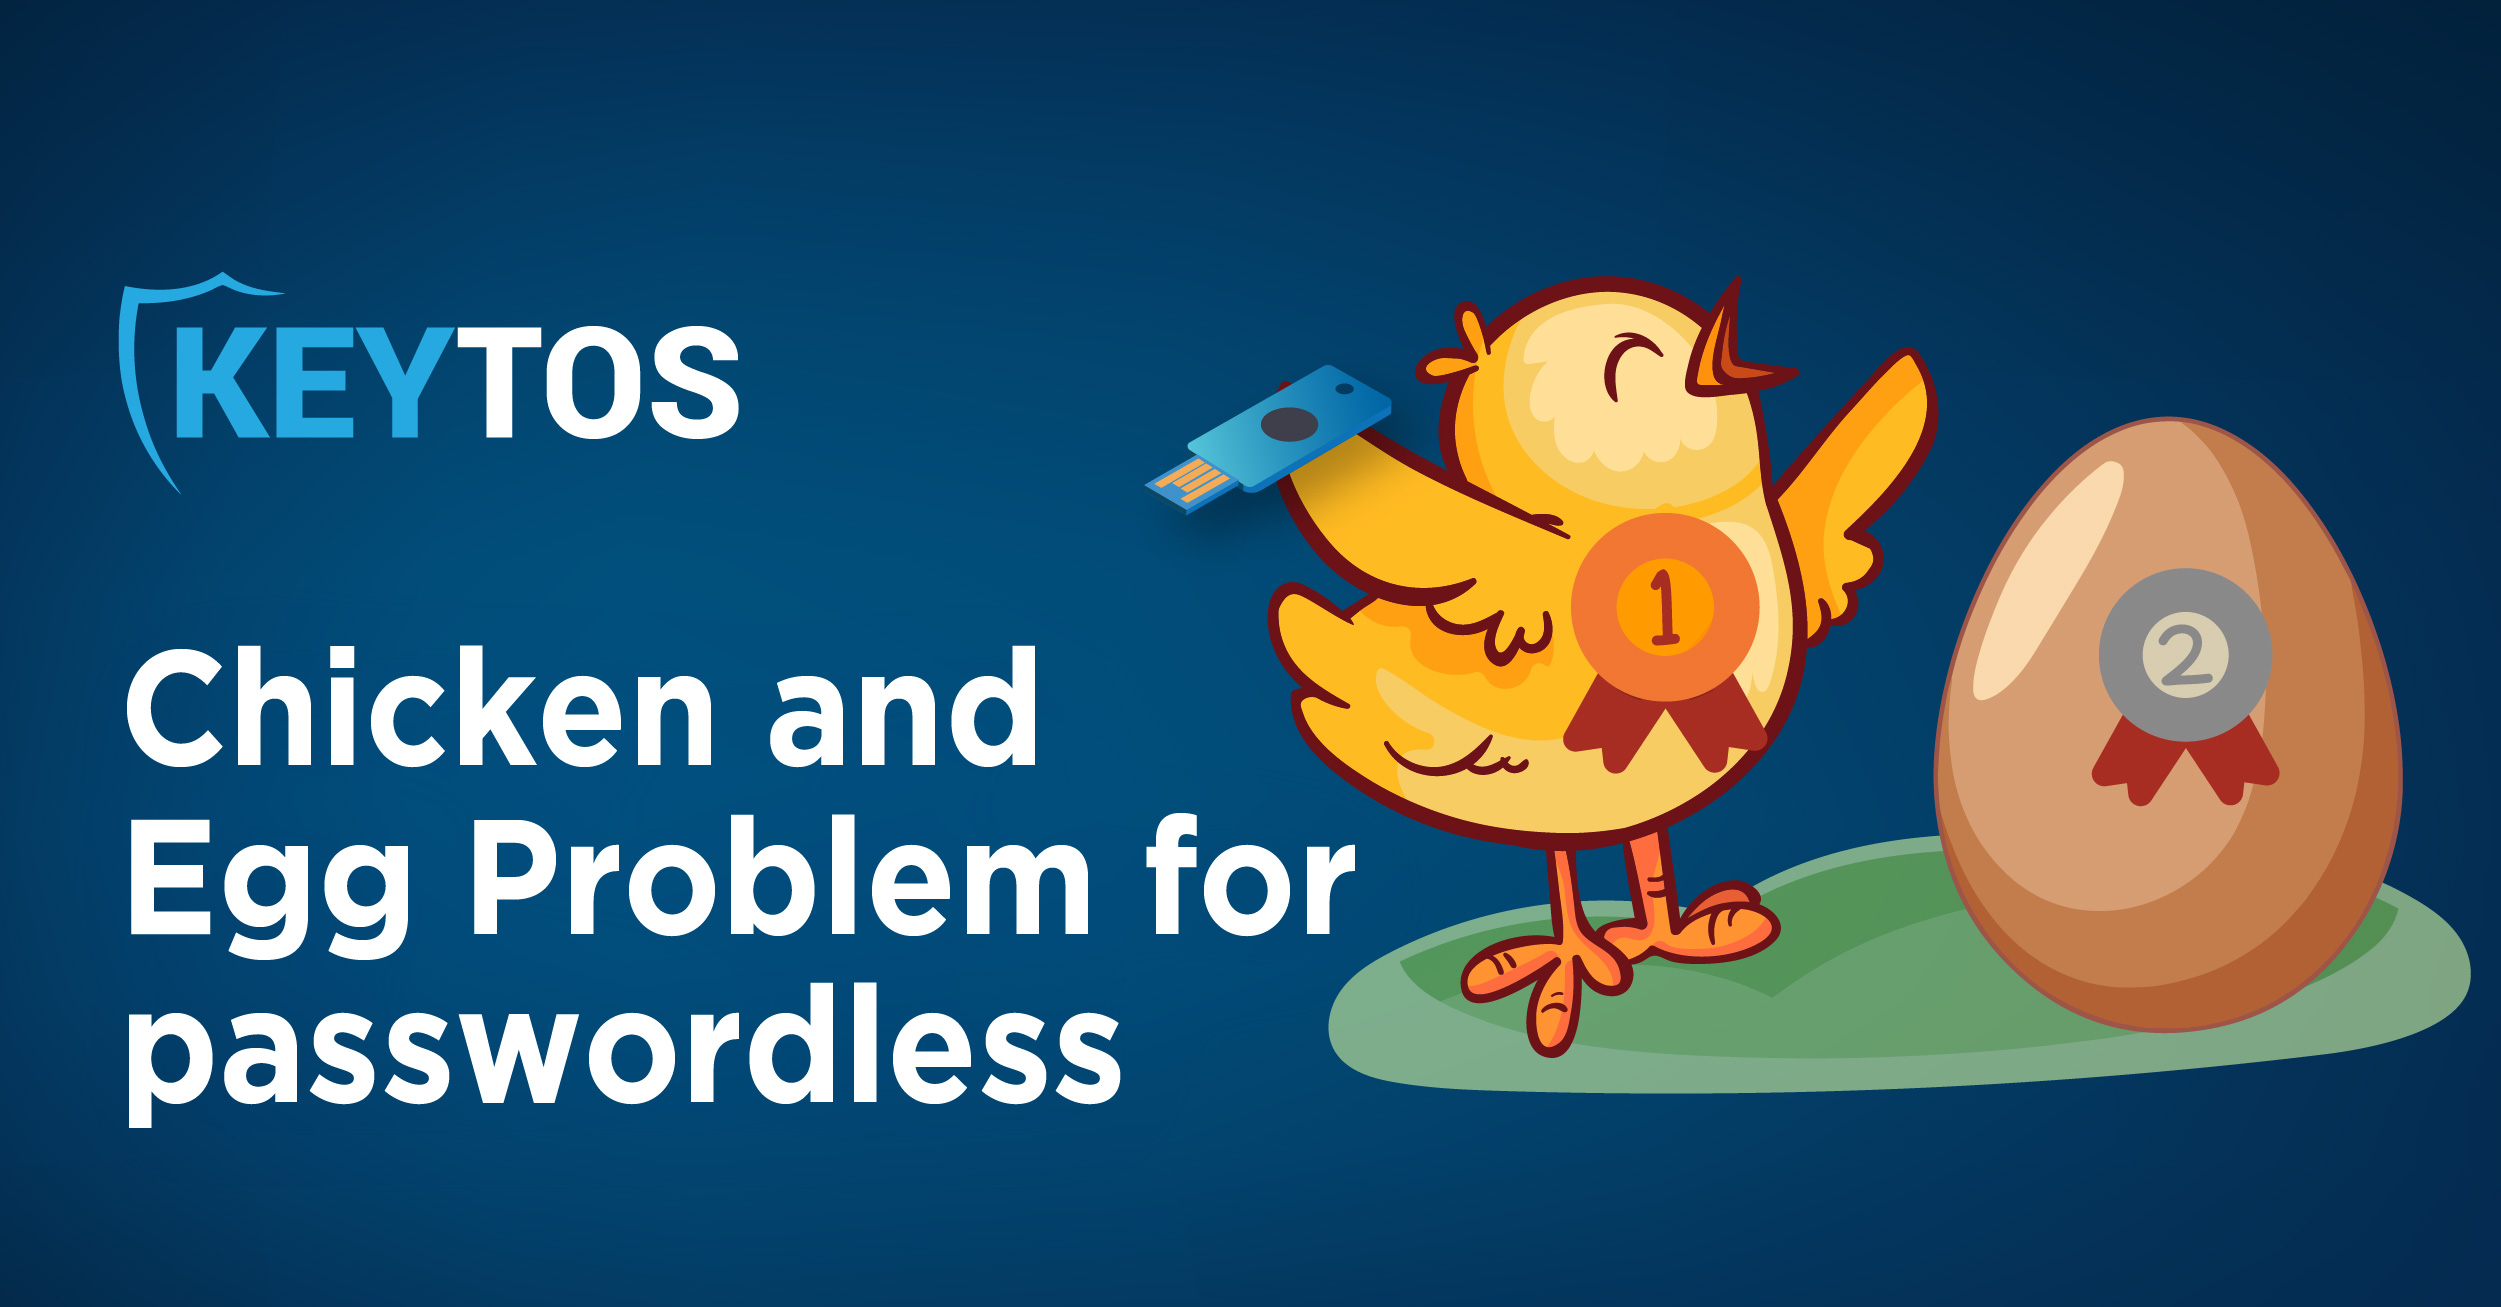 The Chicken and Egg Problem for Passwordless